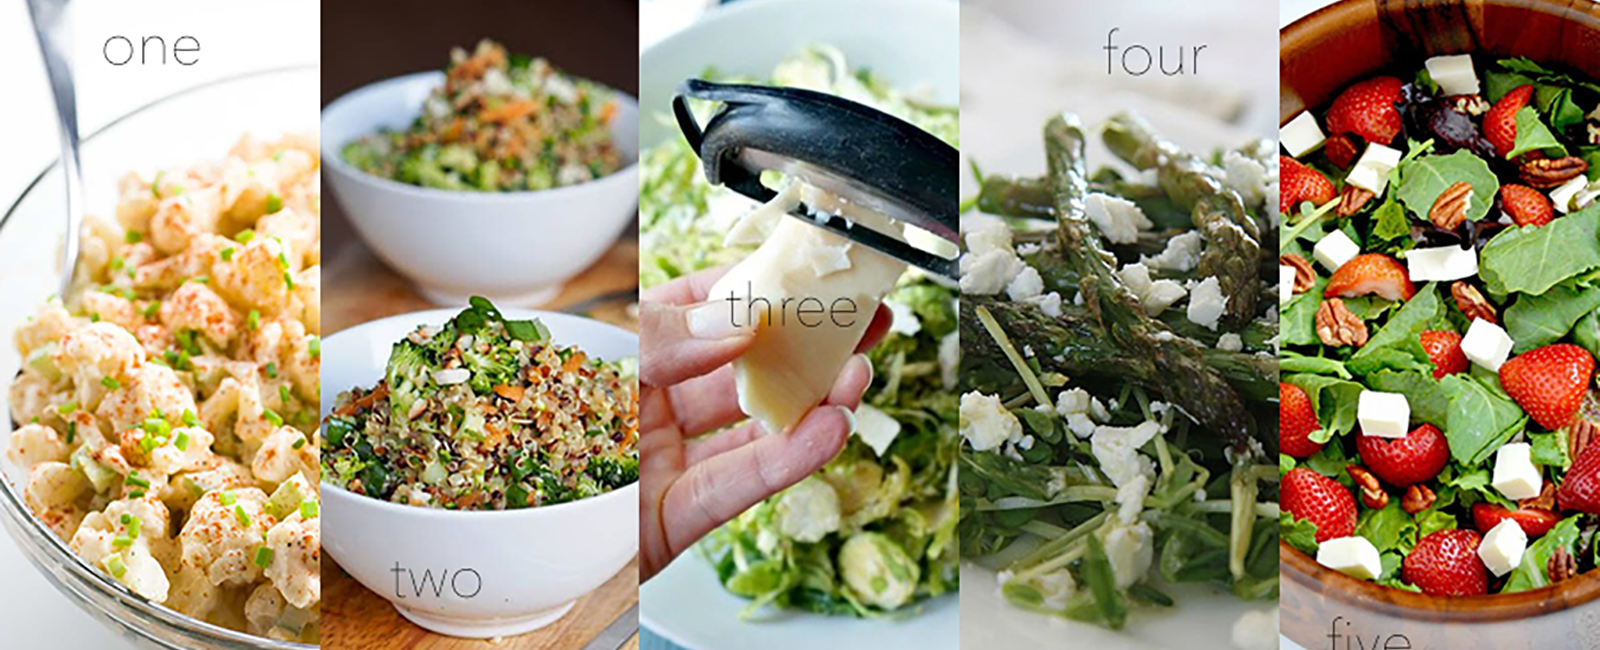 Delicious salads that'll actually have you wanting more. Here are five of my faves.